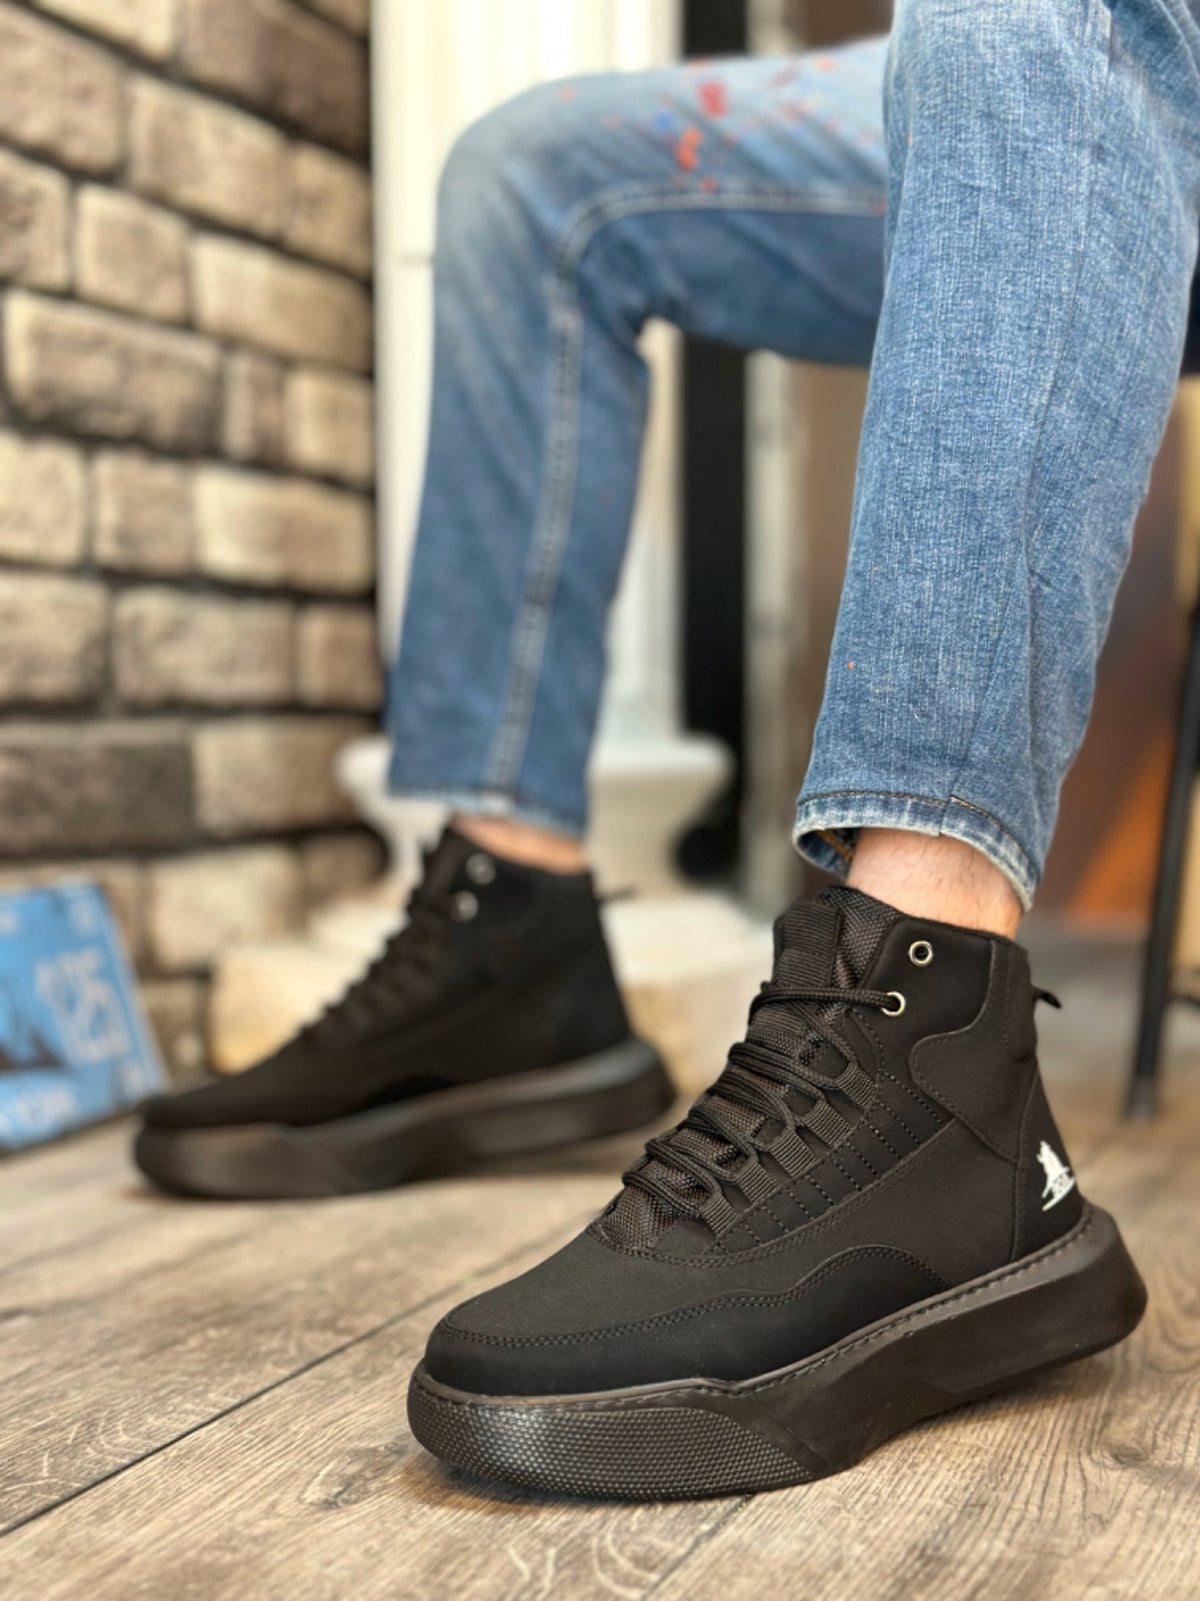 BA0318 Lace-up Men's High Sole Black Sole Sports Boots - STREETMODE ™